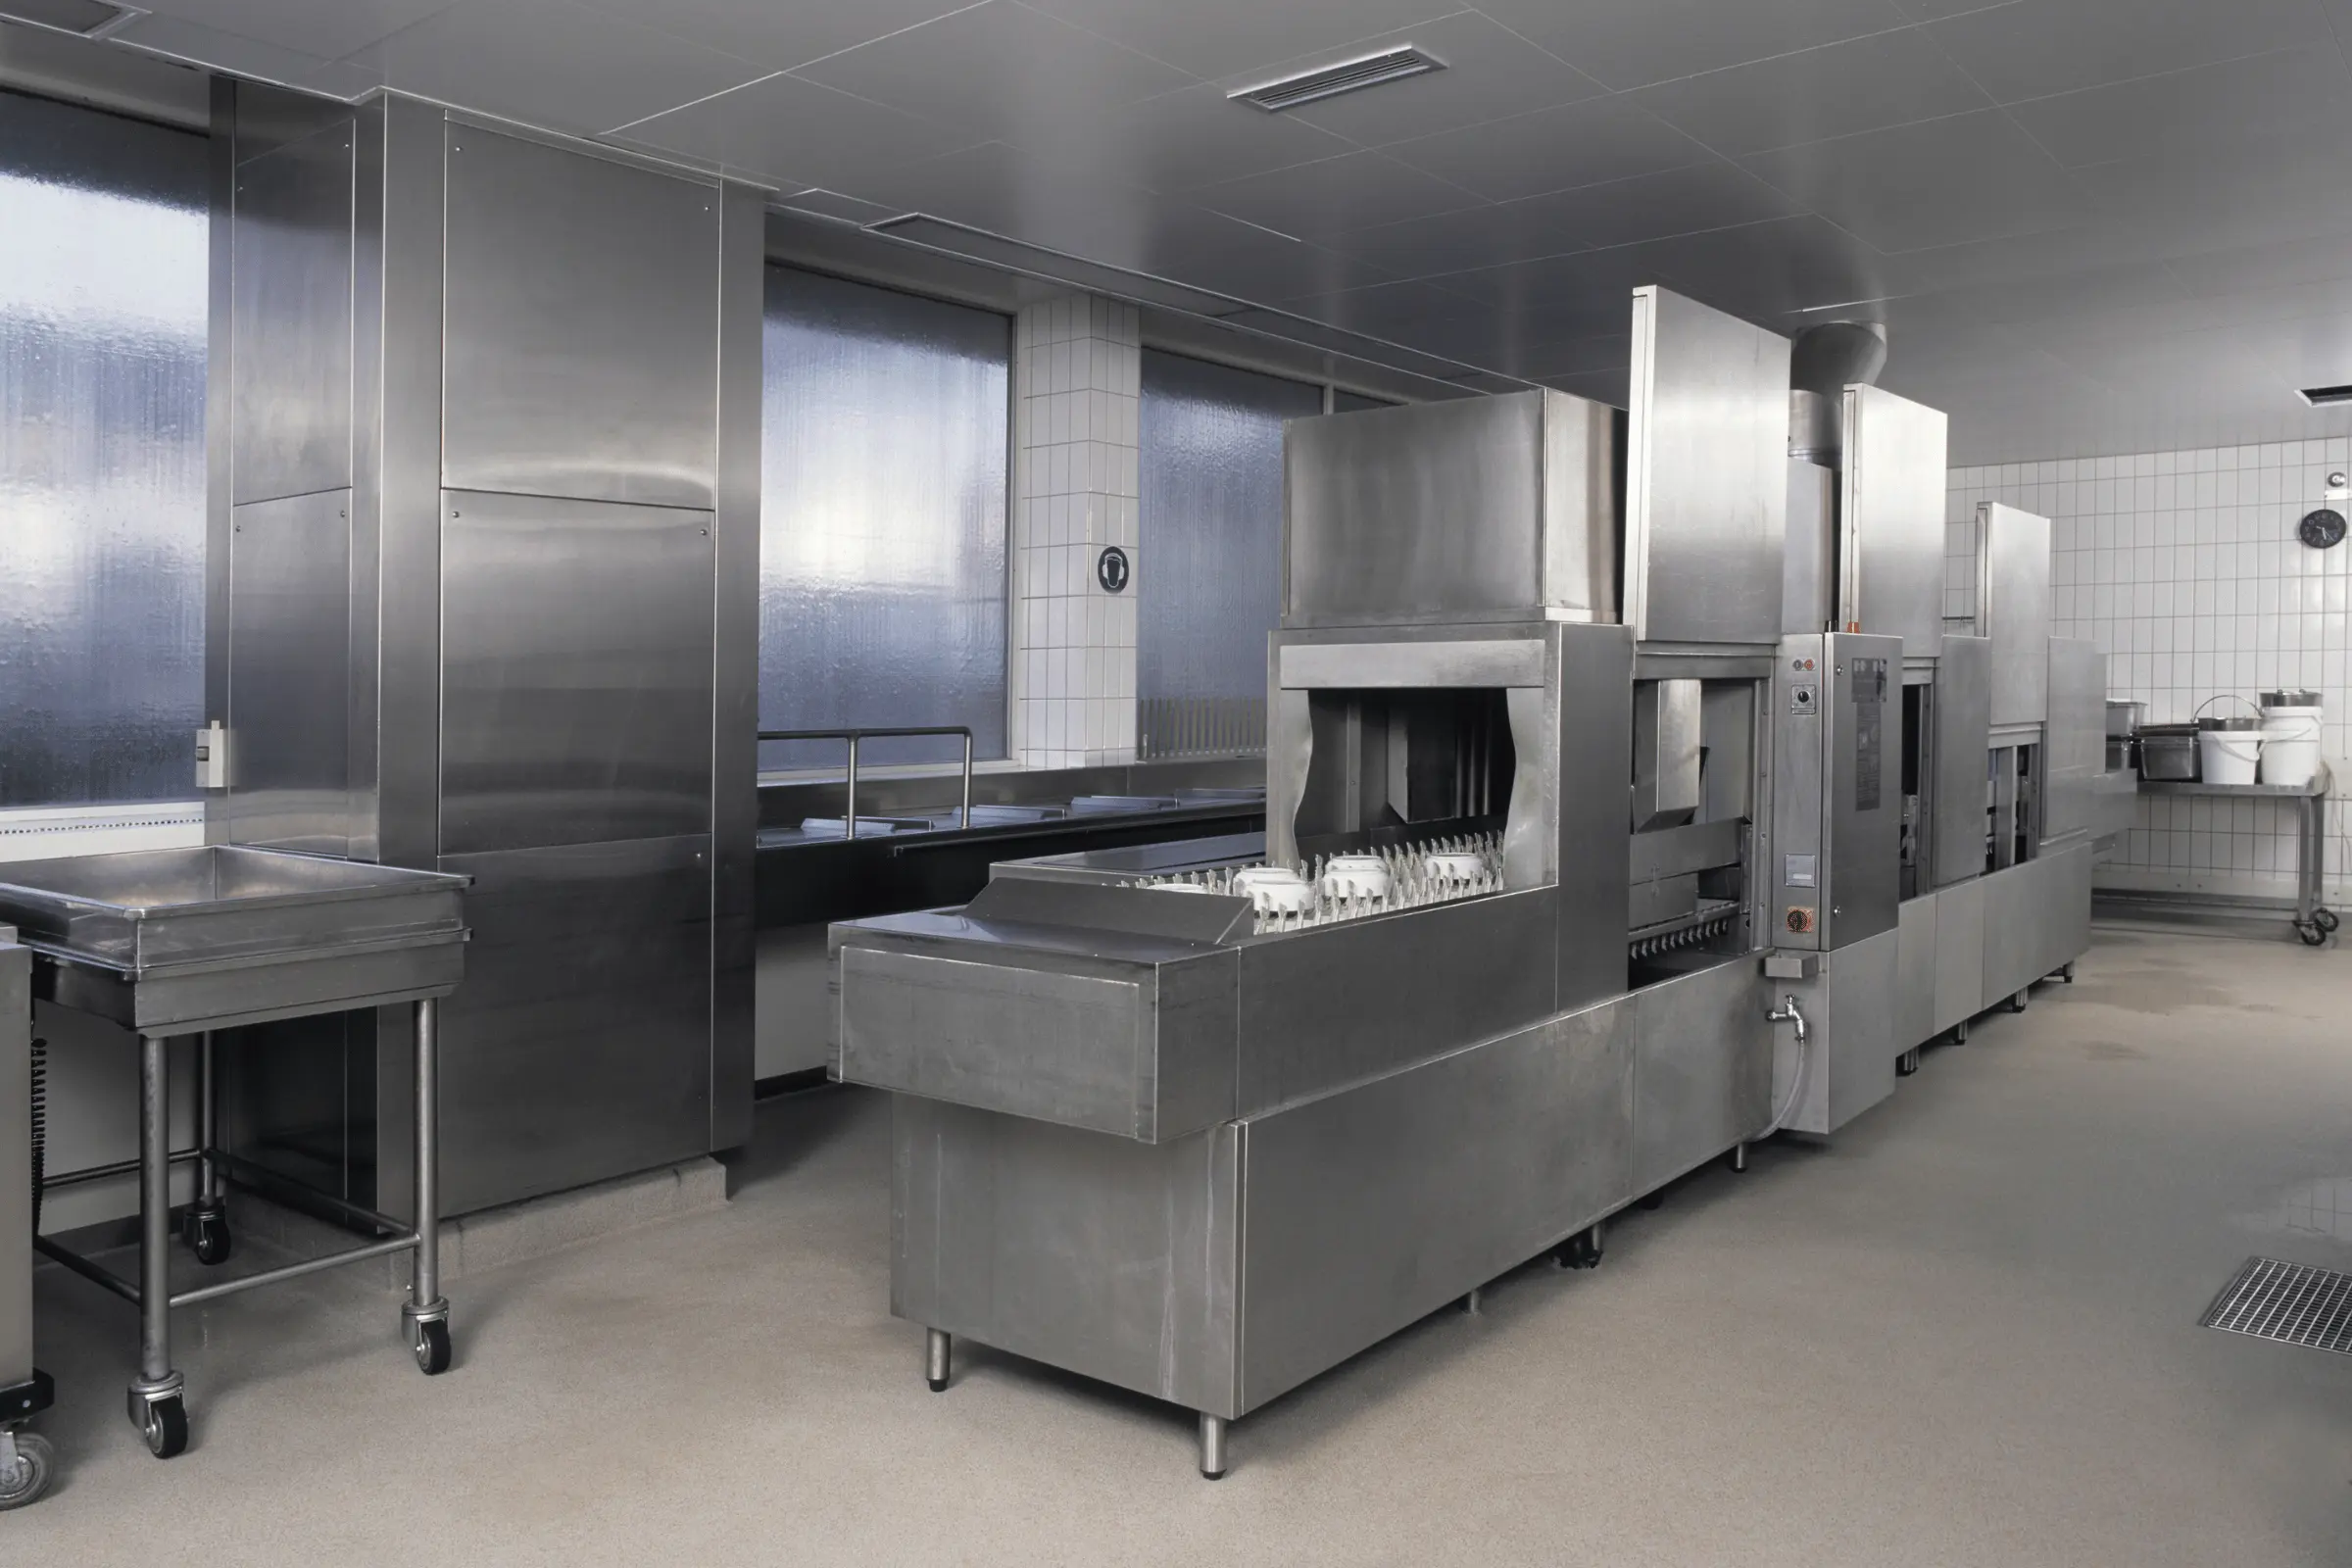 Professional Oven Cleaning Services in London _ Klense - 03